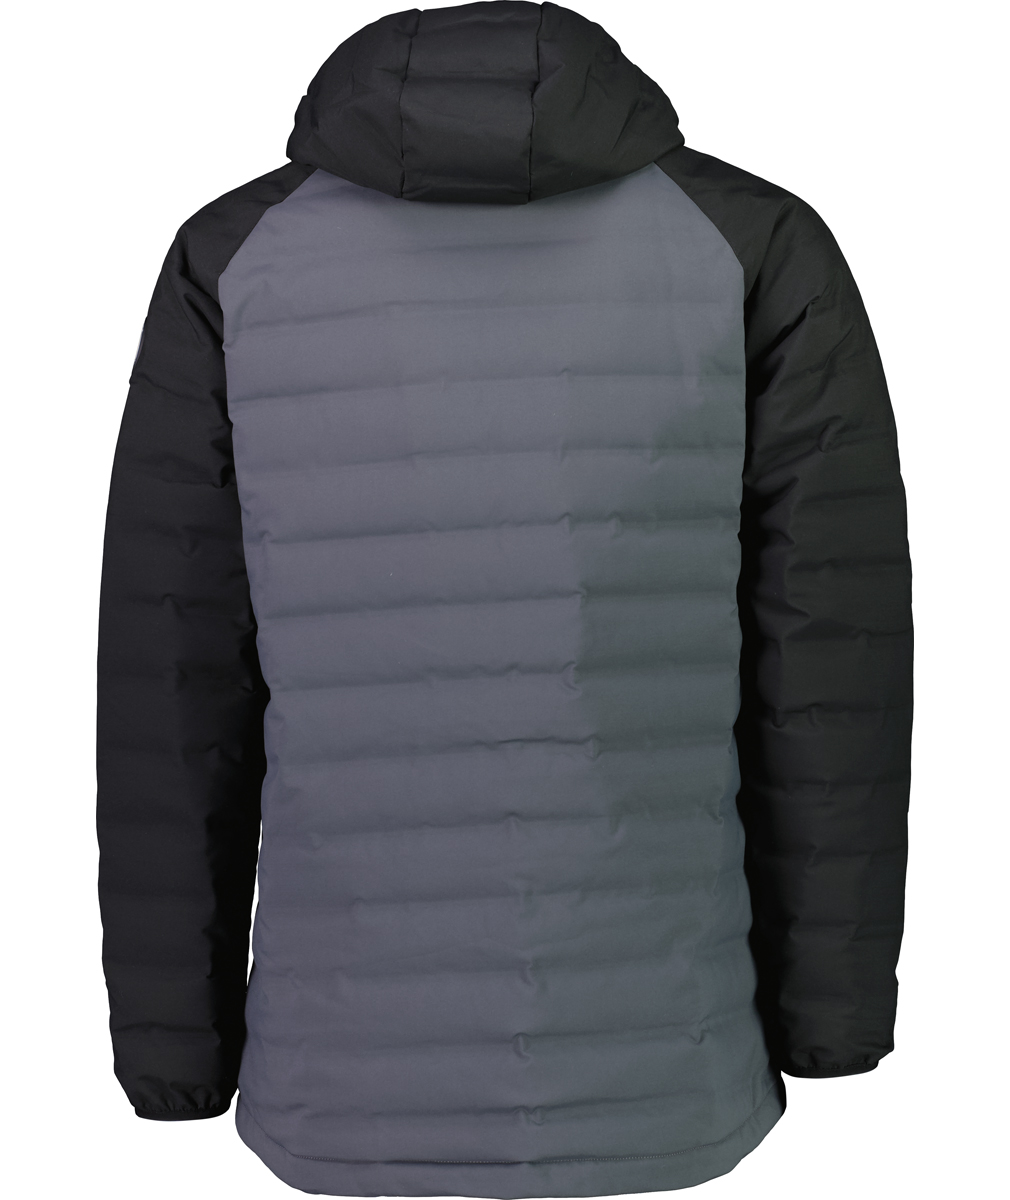 Men's Storm Down Insulated Jacket